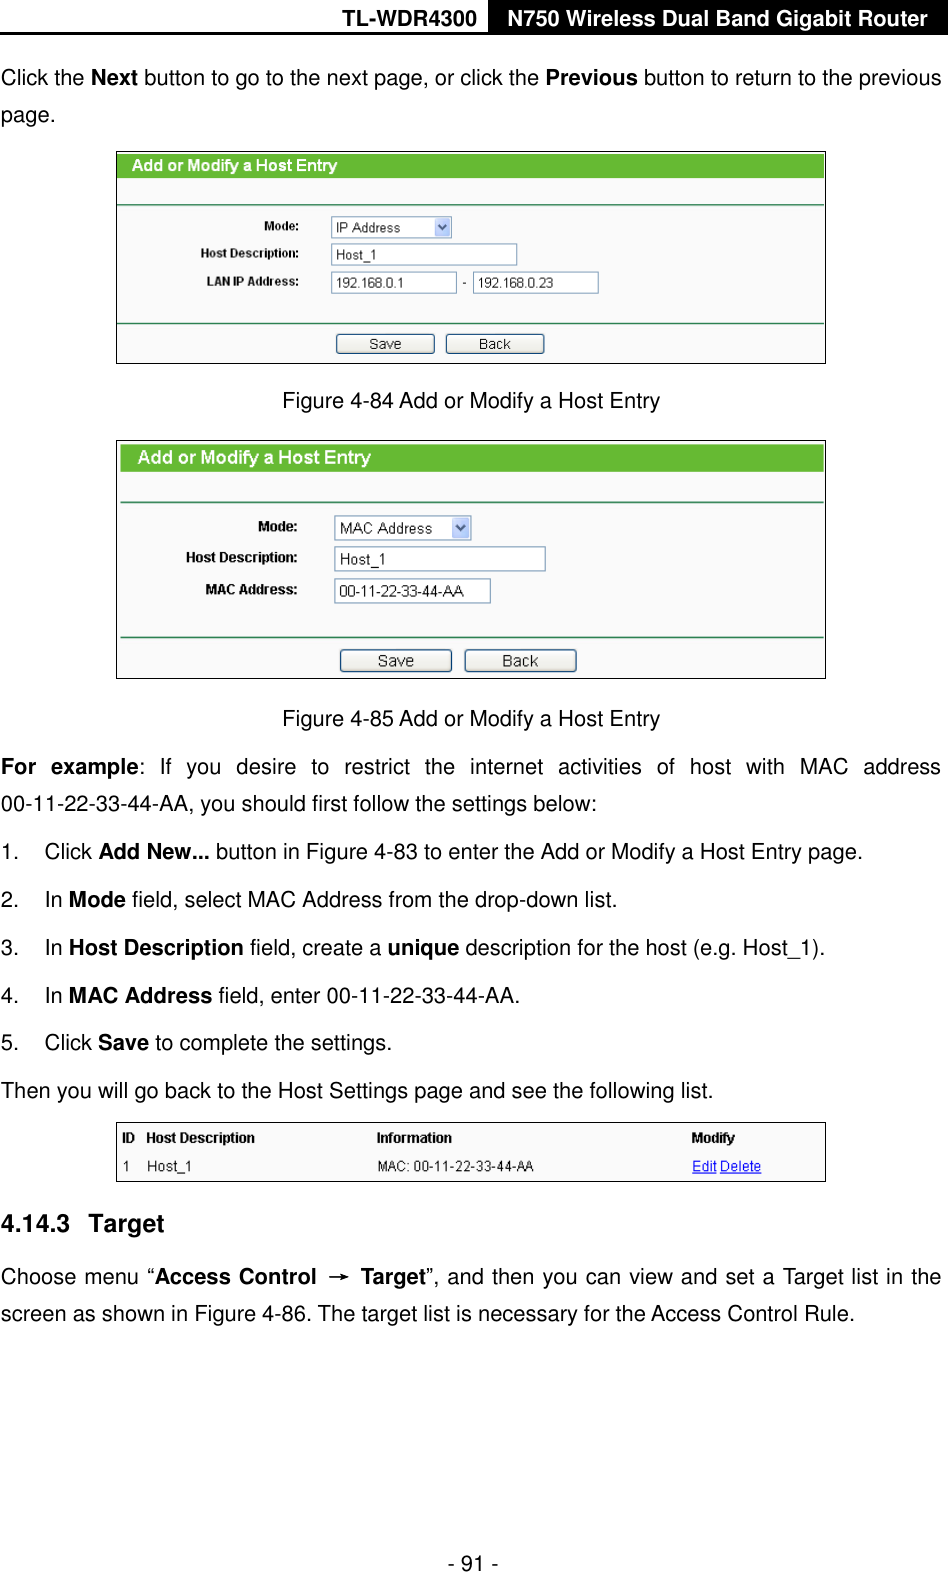 TL-WDR4300 N750 Wireless Dual Band Gigabit Router  - 91 - Click the Next button to go to the next page, or click the Previous button to return to the previous page.  Figure 4-84 Add or Modify a Host Entry  Figure 4-85 Add or Modify a Host Entry For  example:  If  you  desire  to  restrict  the  internet  activities  of  host  with  MAC  address 00-11-22-33-44-AA, you should first follow the settings below:   1.  Click Add New... button in Figure 4-83 to enter the Add or Modify a Host Entry page.   2.  In Mode field, select MAC Address from the drop-down list.   3.  In Host Description field, create a unique description for the host (e.g. Host_1).   4.  In MAC Address field, enter 00-11-22-33-44-AA.   5.  Click Save to complete the settings.   Then you will go back to the Host Settings page and see the following list.  4.14.3  Target Choose menu “Access Control  →  Target”, and then you can view and set a Target list in the screen as shown in Figure 4-86. The target list is necessary for the Access Control Rule. 